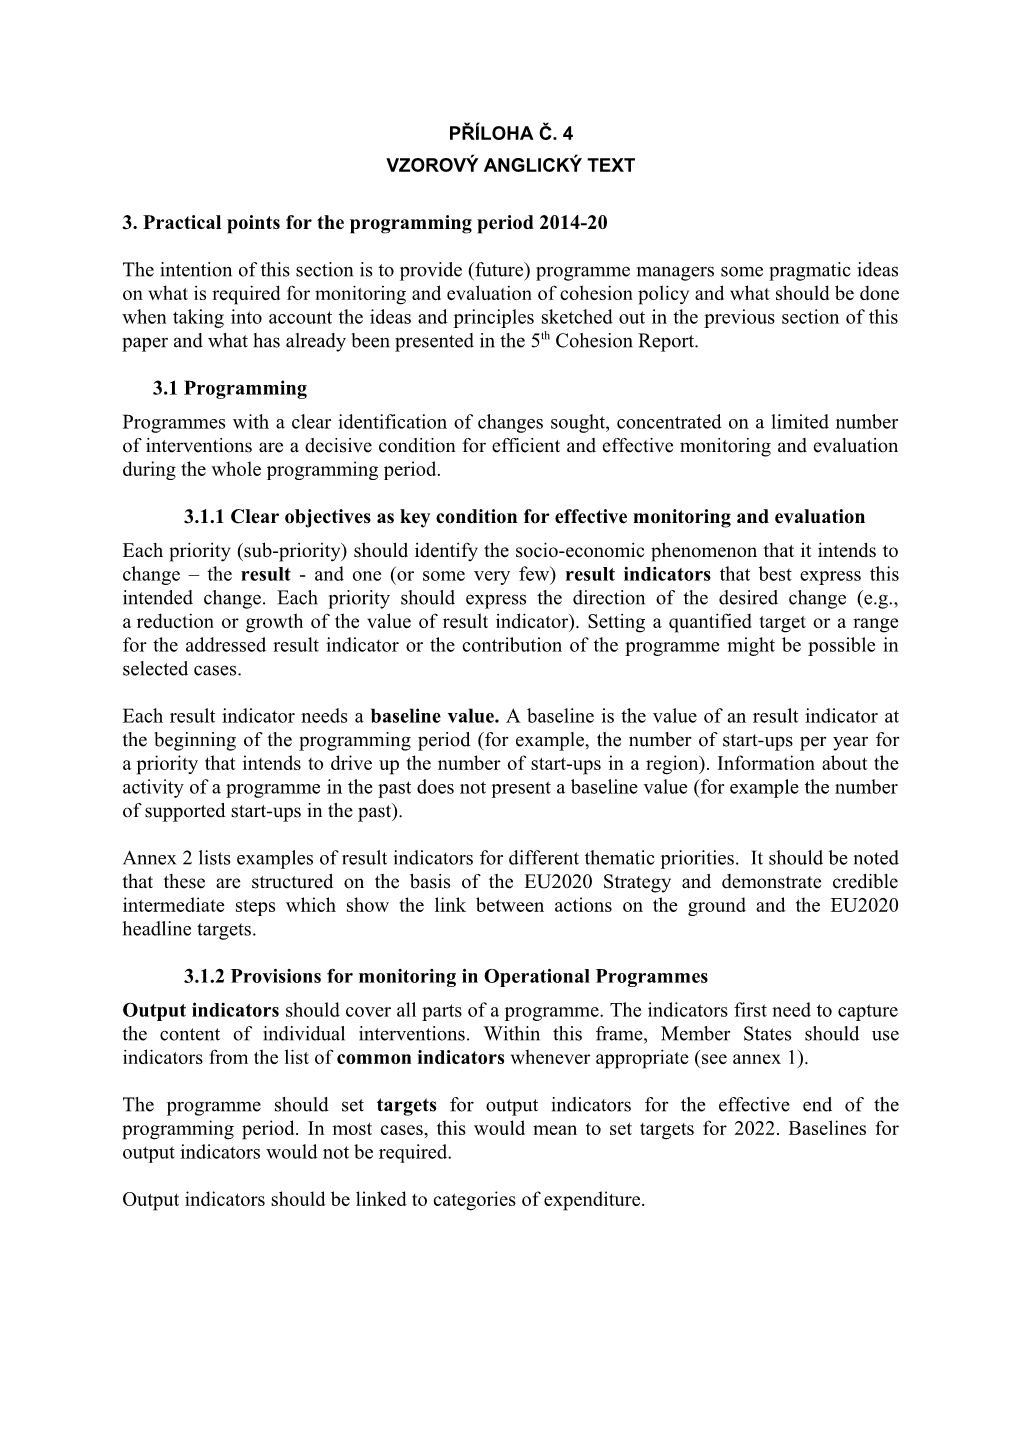 3. Practical Points for the Programming Period 2014-20